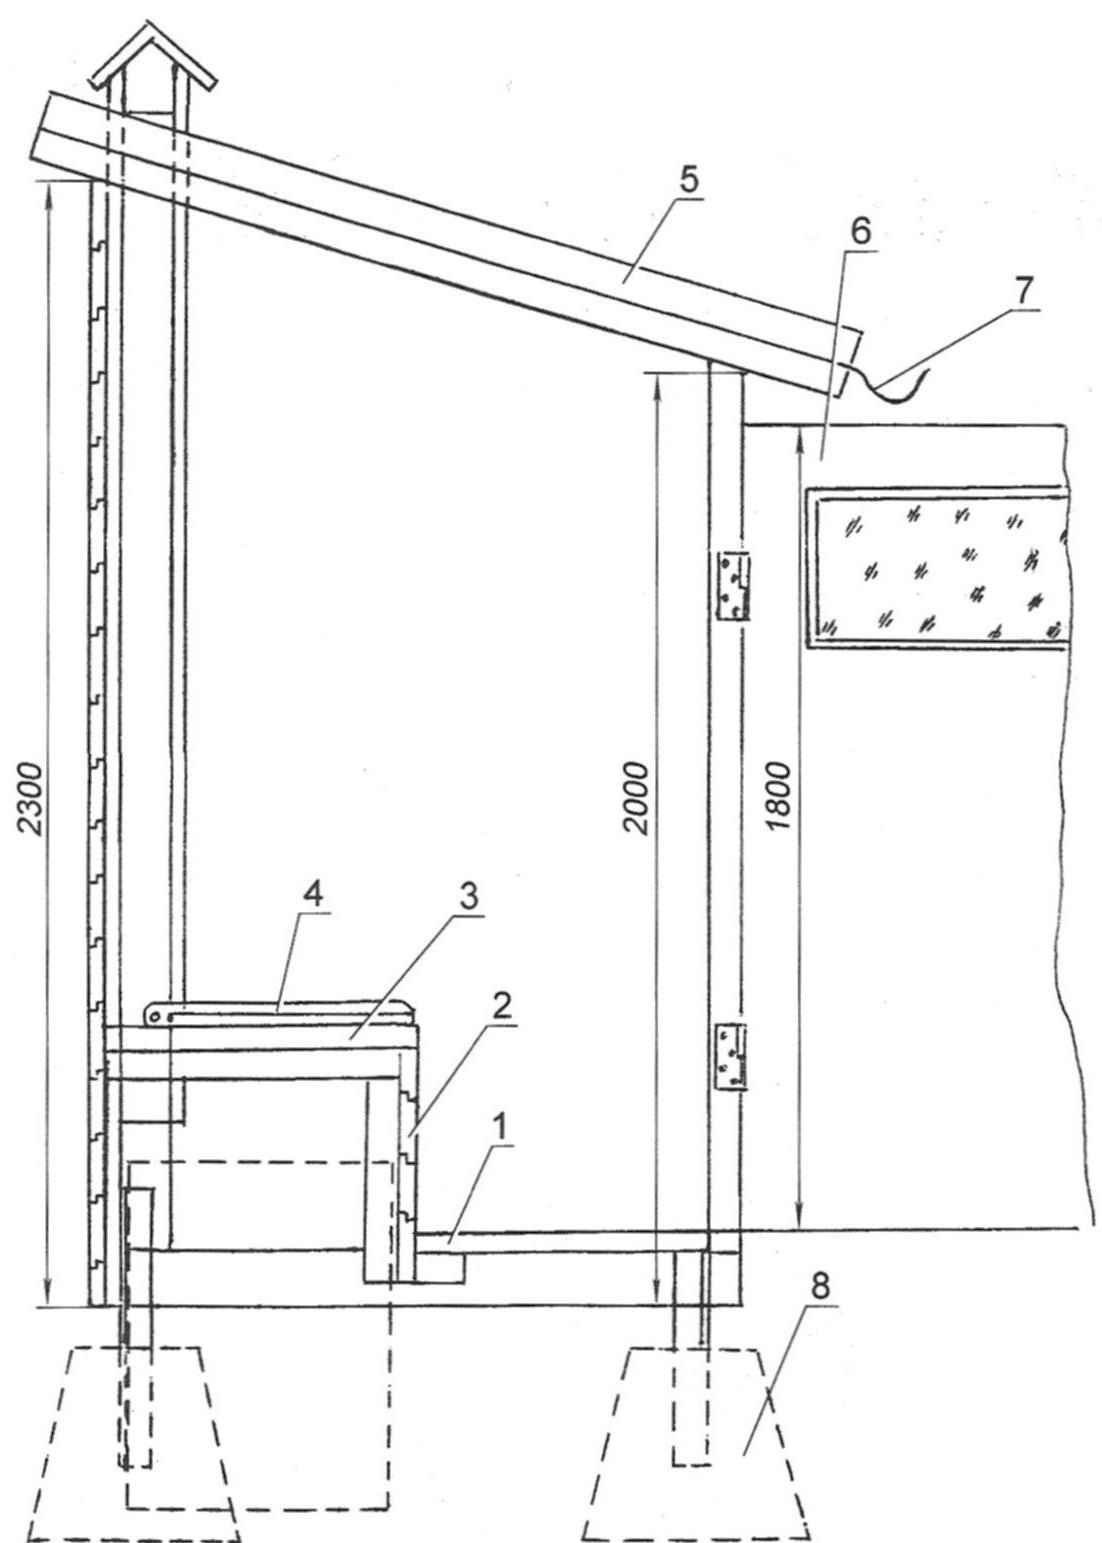 A vertical section of the toilet